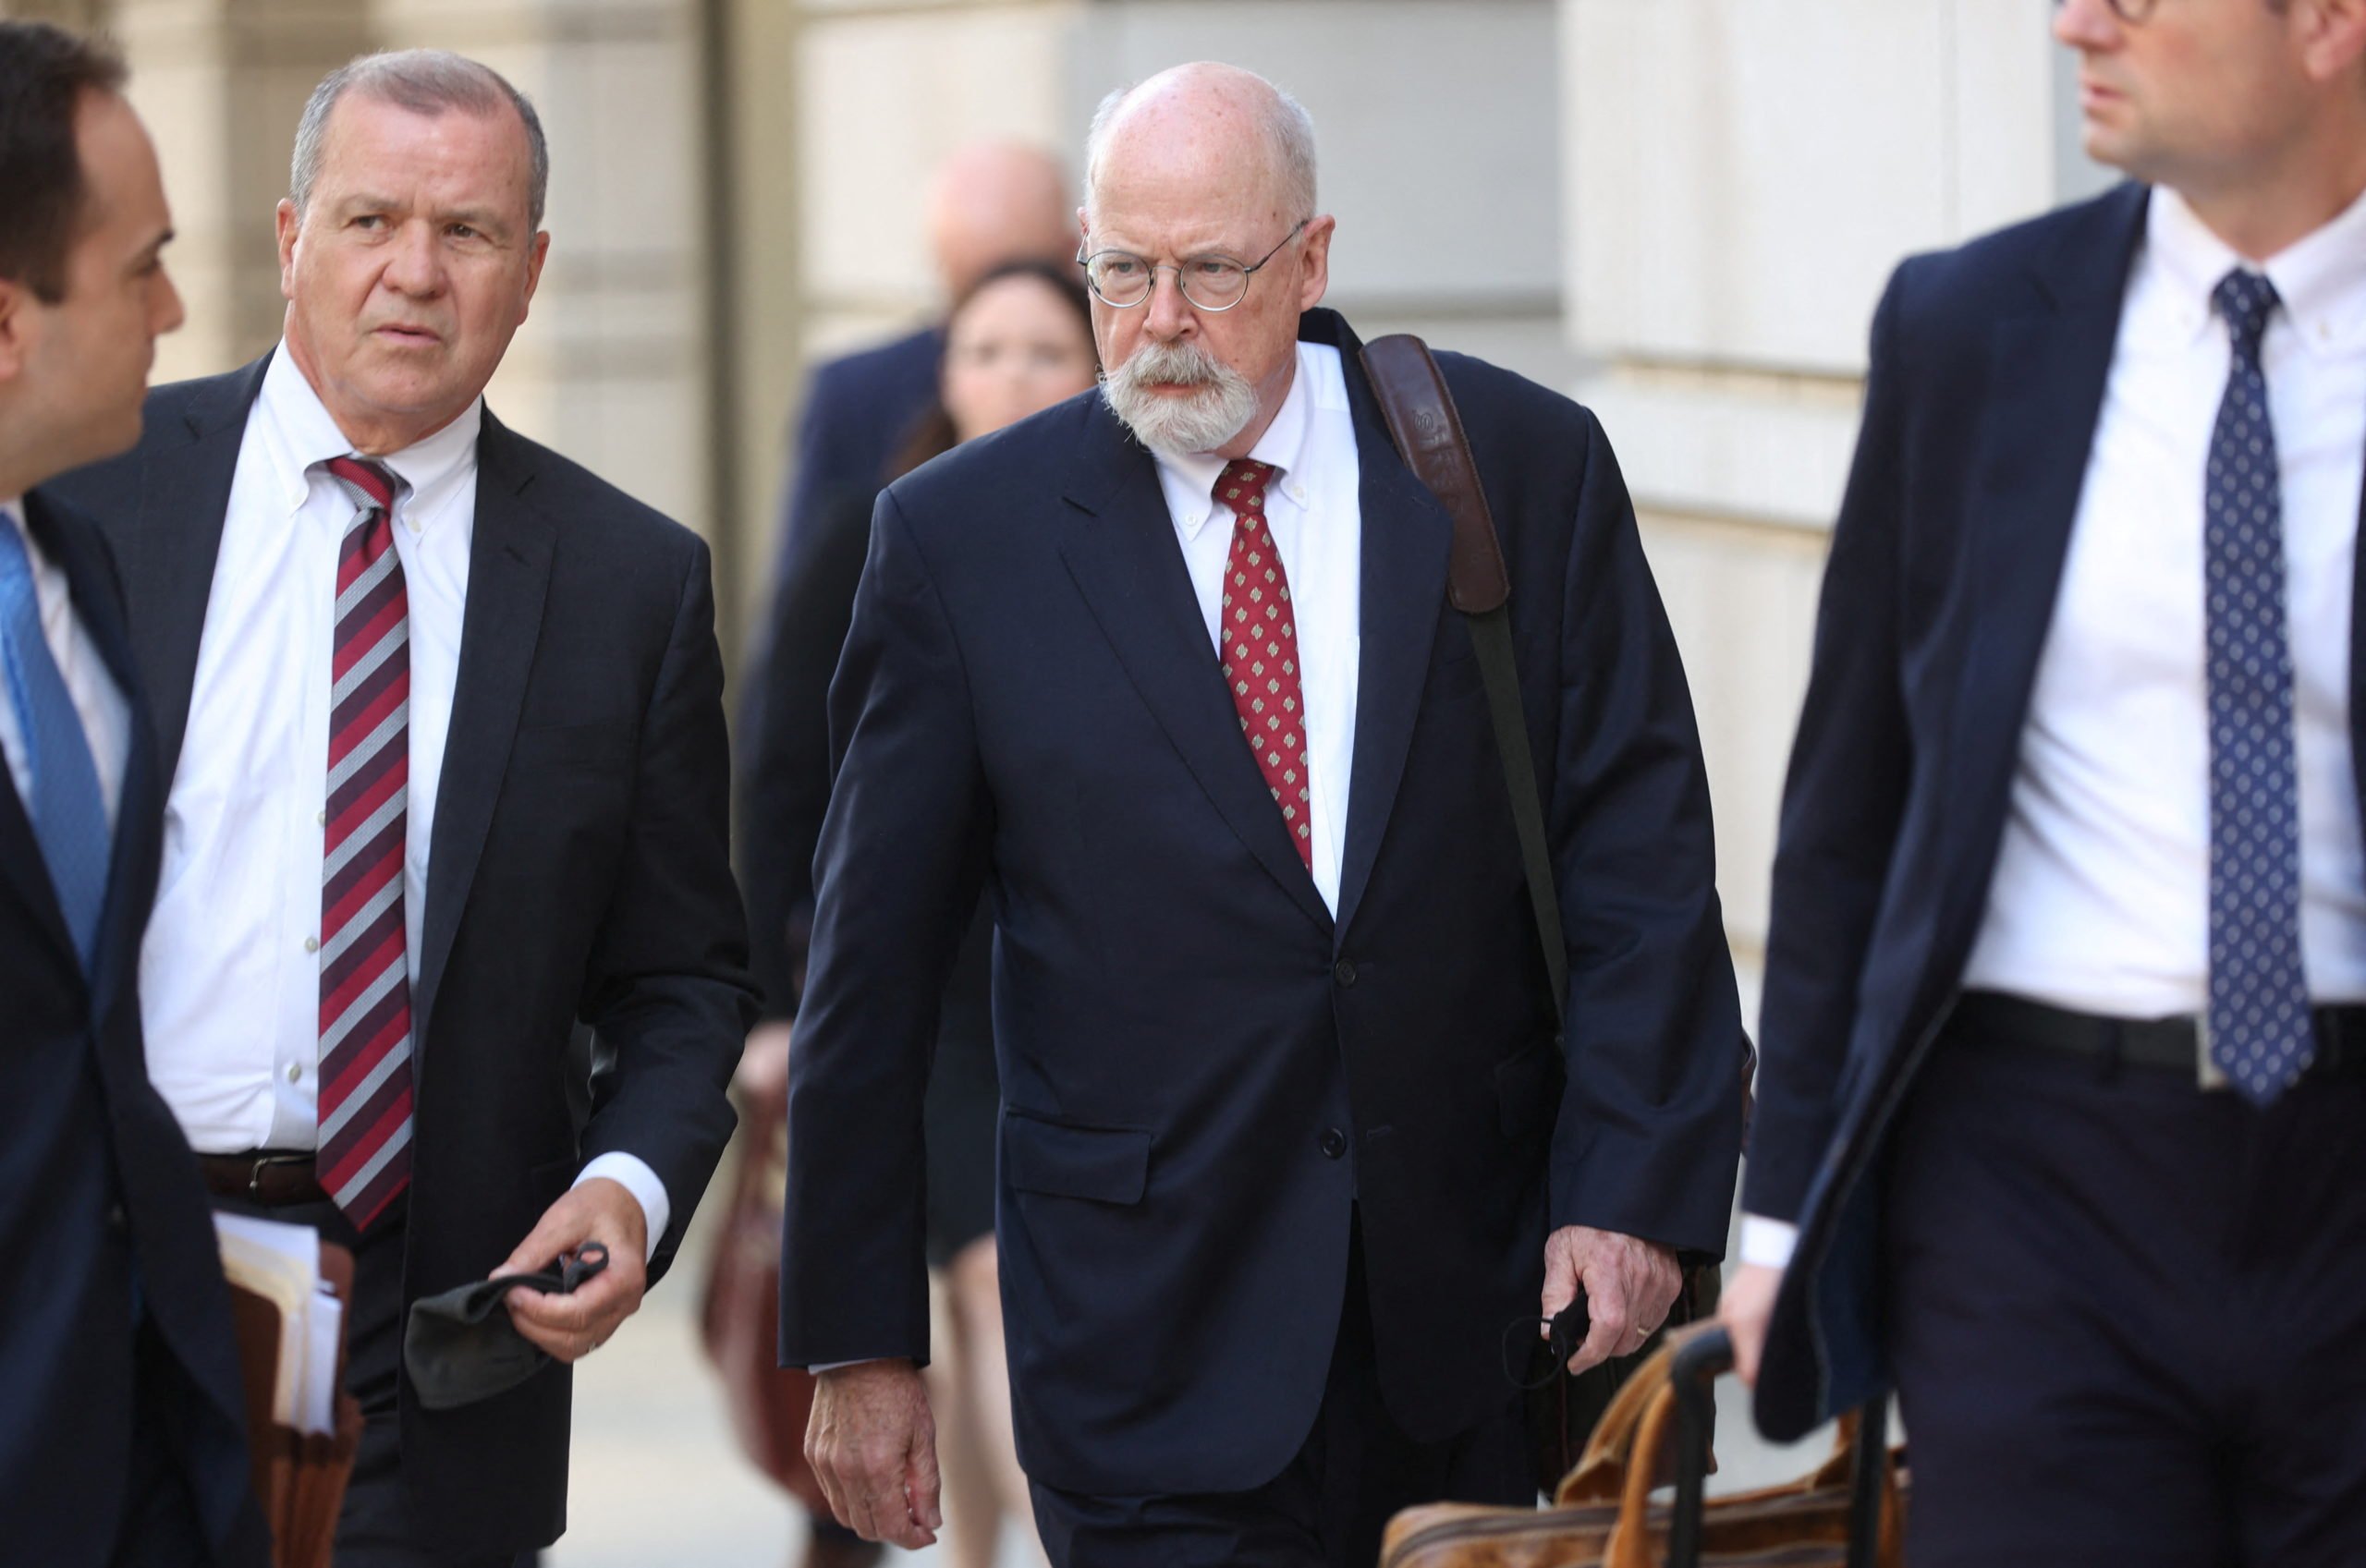 Special Counsel John Durham departs the U.S. Federal Courthouse with prosecutors and staff after opening arguments in the trial of Attorney Michael Sussmann, where Durham is prosecuting Sussmann on charges that Sussmann lied to the Federal Bureau of Investigation (FBI) while providing information about later discredited allegations of communications between the 2016 presidential campaign of former U.S. President Donald Trump and Russia, in Washington, U.S. May 17, 2022. REUTERS/Julia Nikhinson